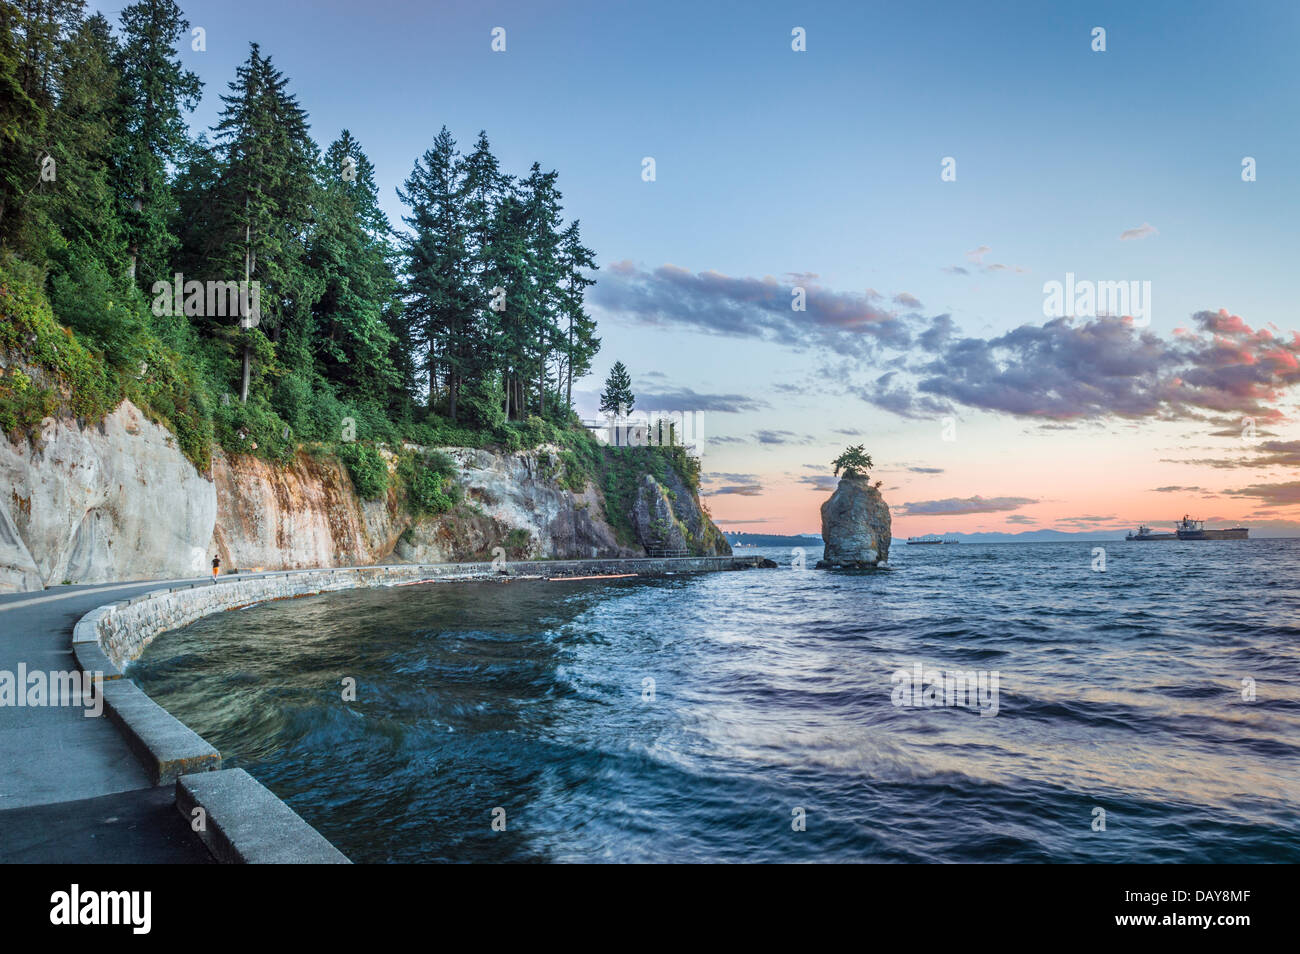 Looking South on a summer evening along the Stanley Park seawall at Siwash Rock, Vancouver, BC, Canada. Stock Photo